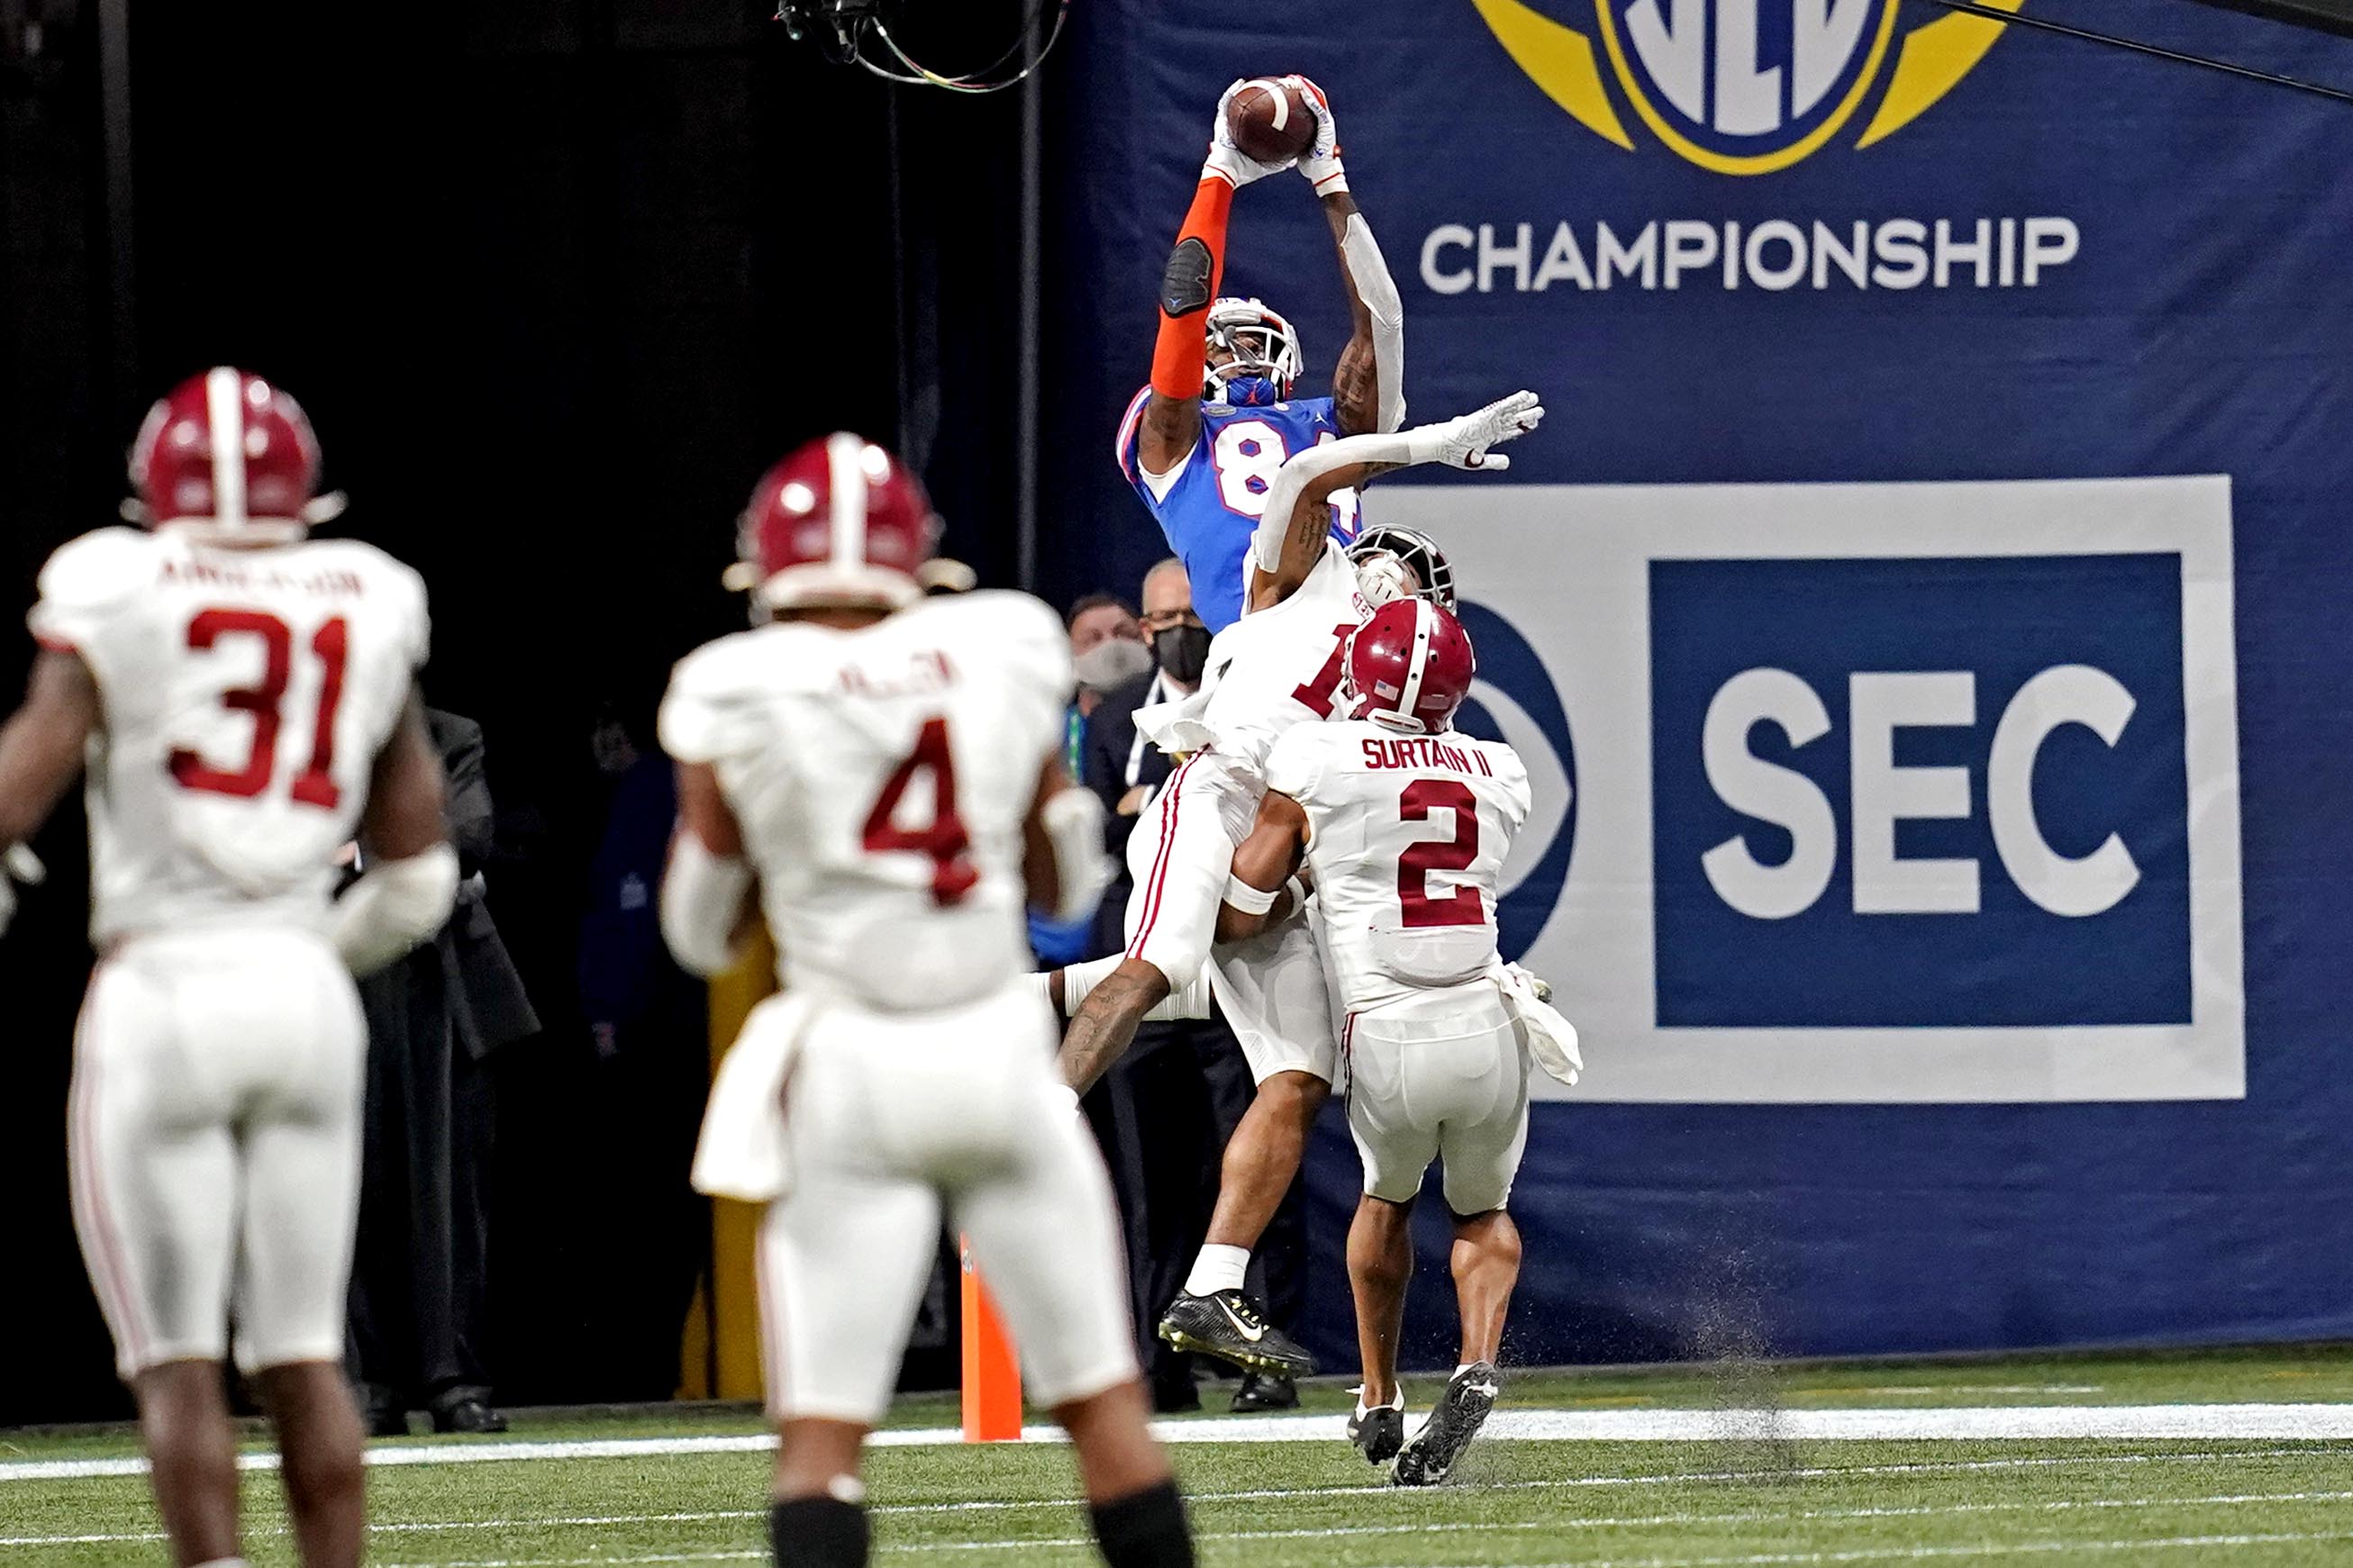 Florida Gators tight end Kyle Pitts (84) makes a touchdown catch against Alabama Crimson Tide defensive back Patrick Surtain II (2) during the fourth quarter in the SEC Championship at Mercedes-Benz Stadium.